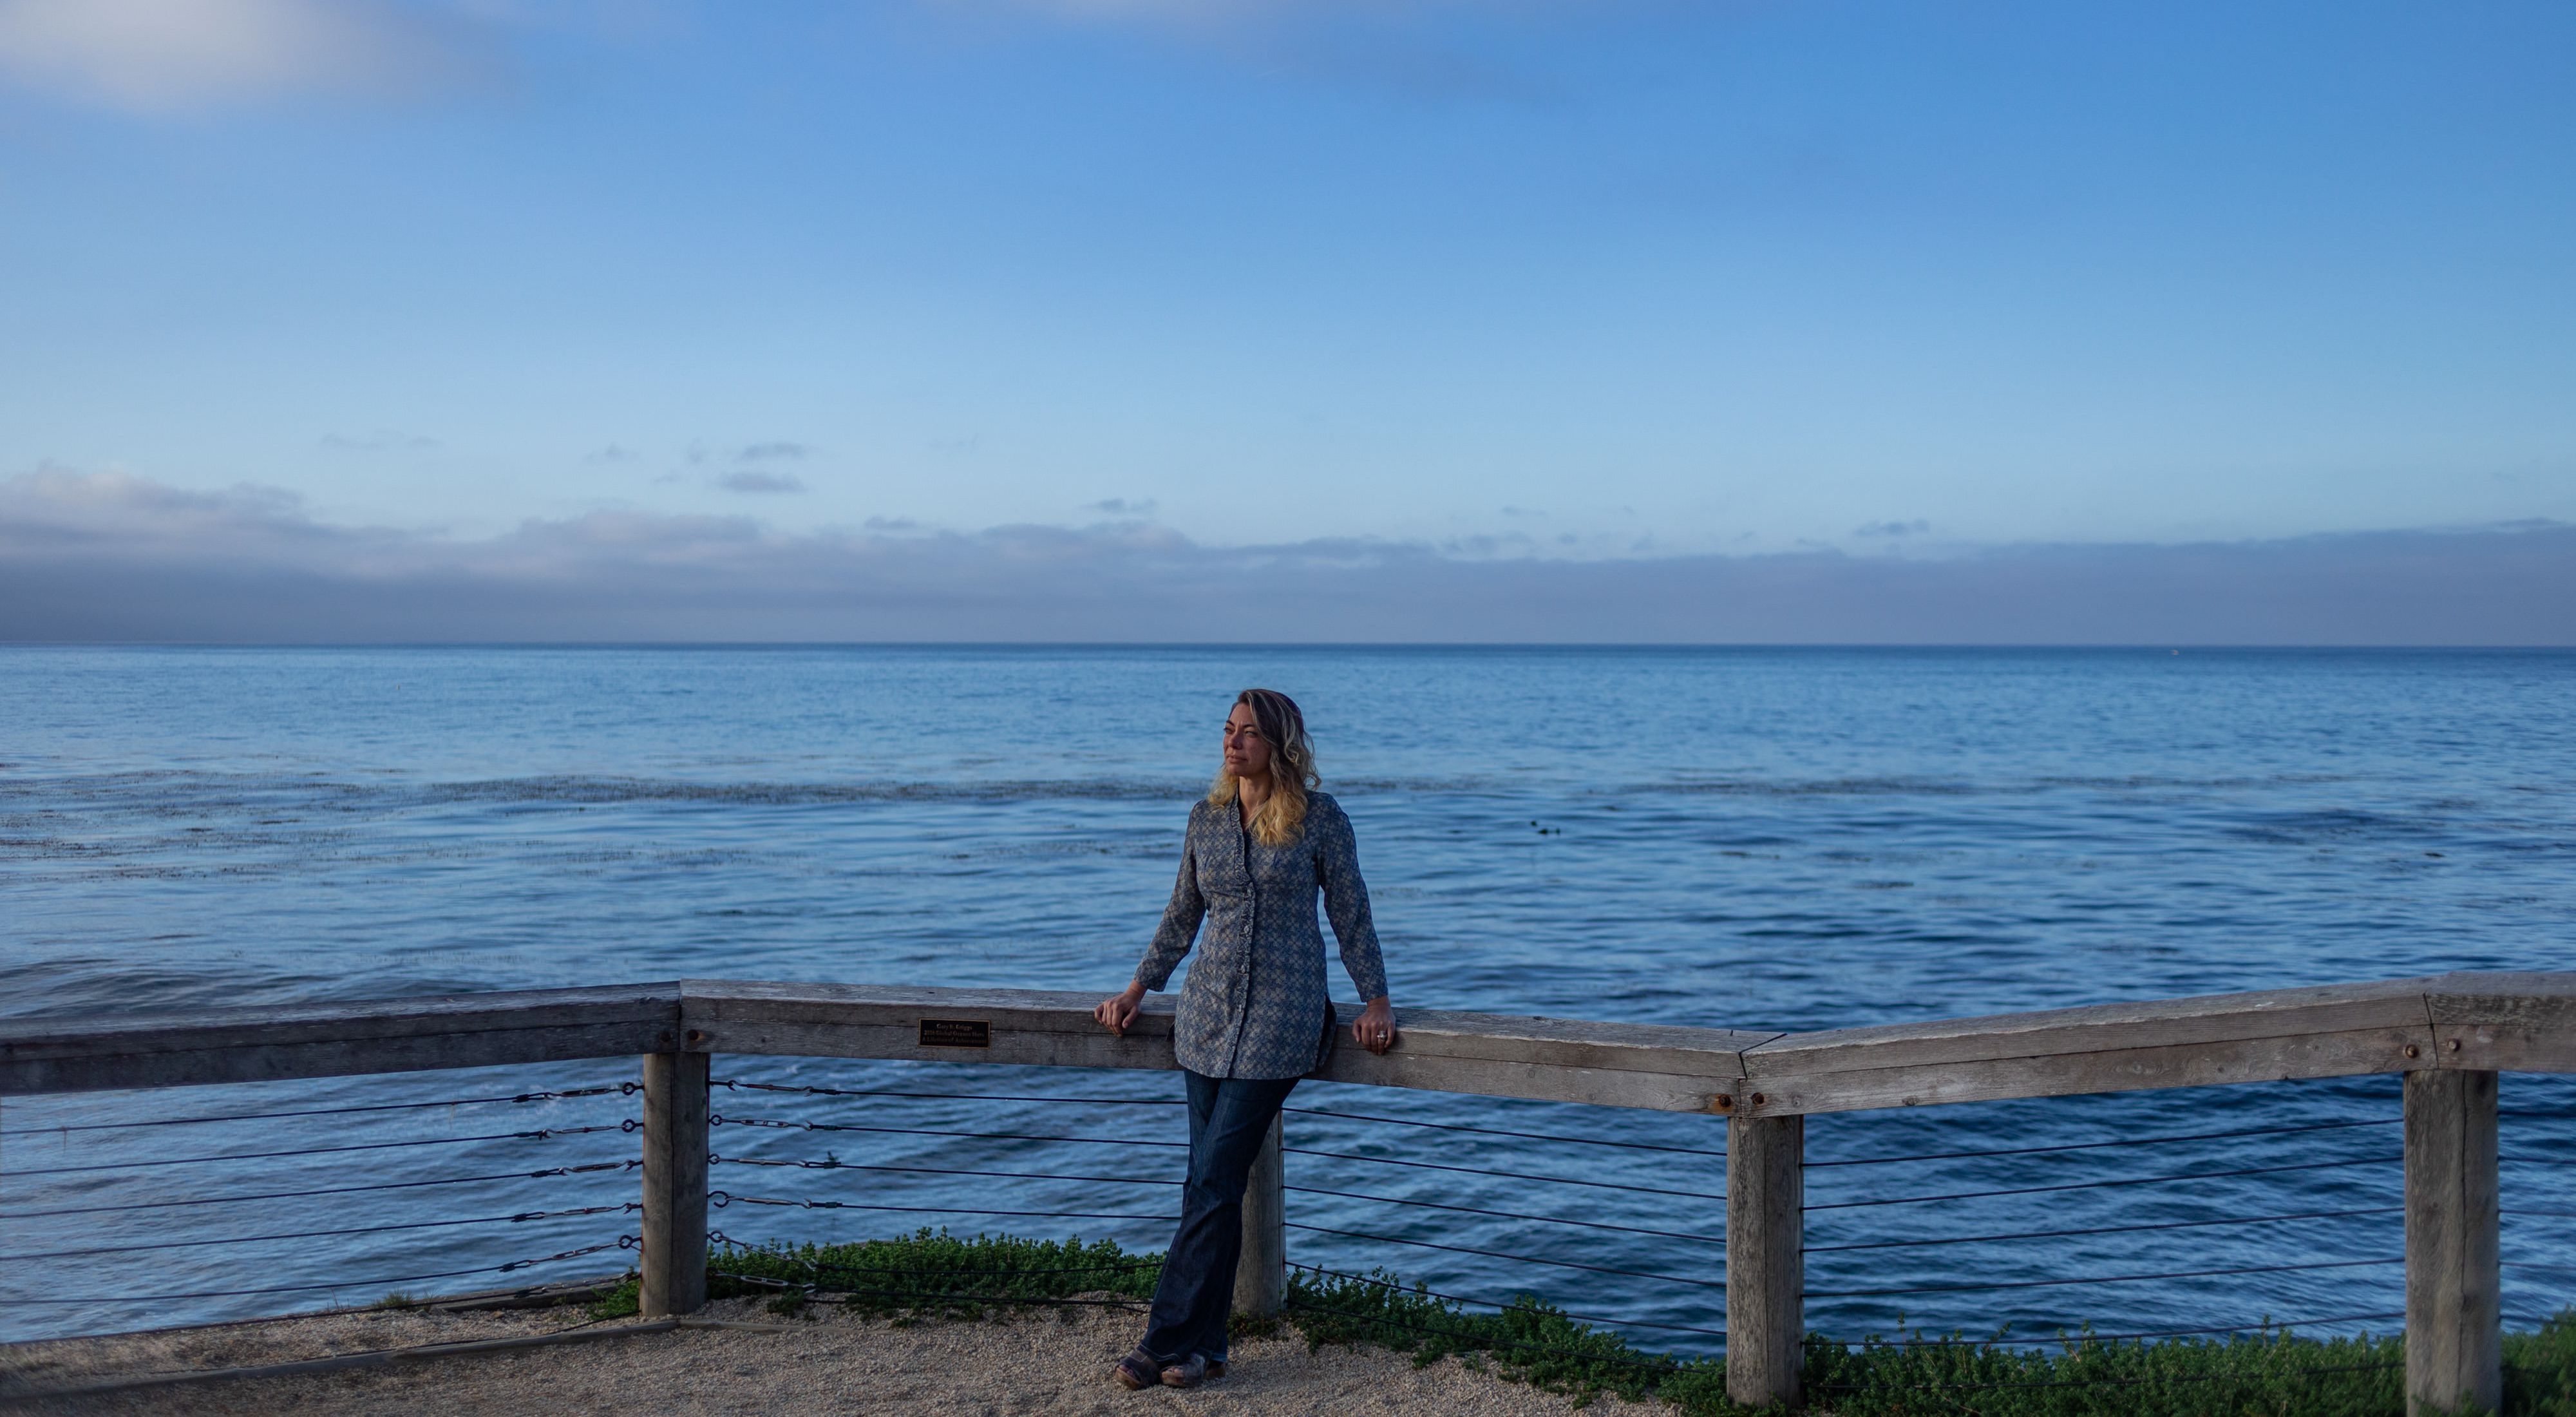 Former TNC lead scientist Heather Tallis leans against a railing facing the camera, with a vast blue Pacific Ocean horizon behind her.